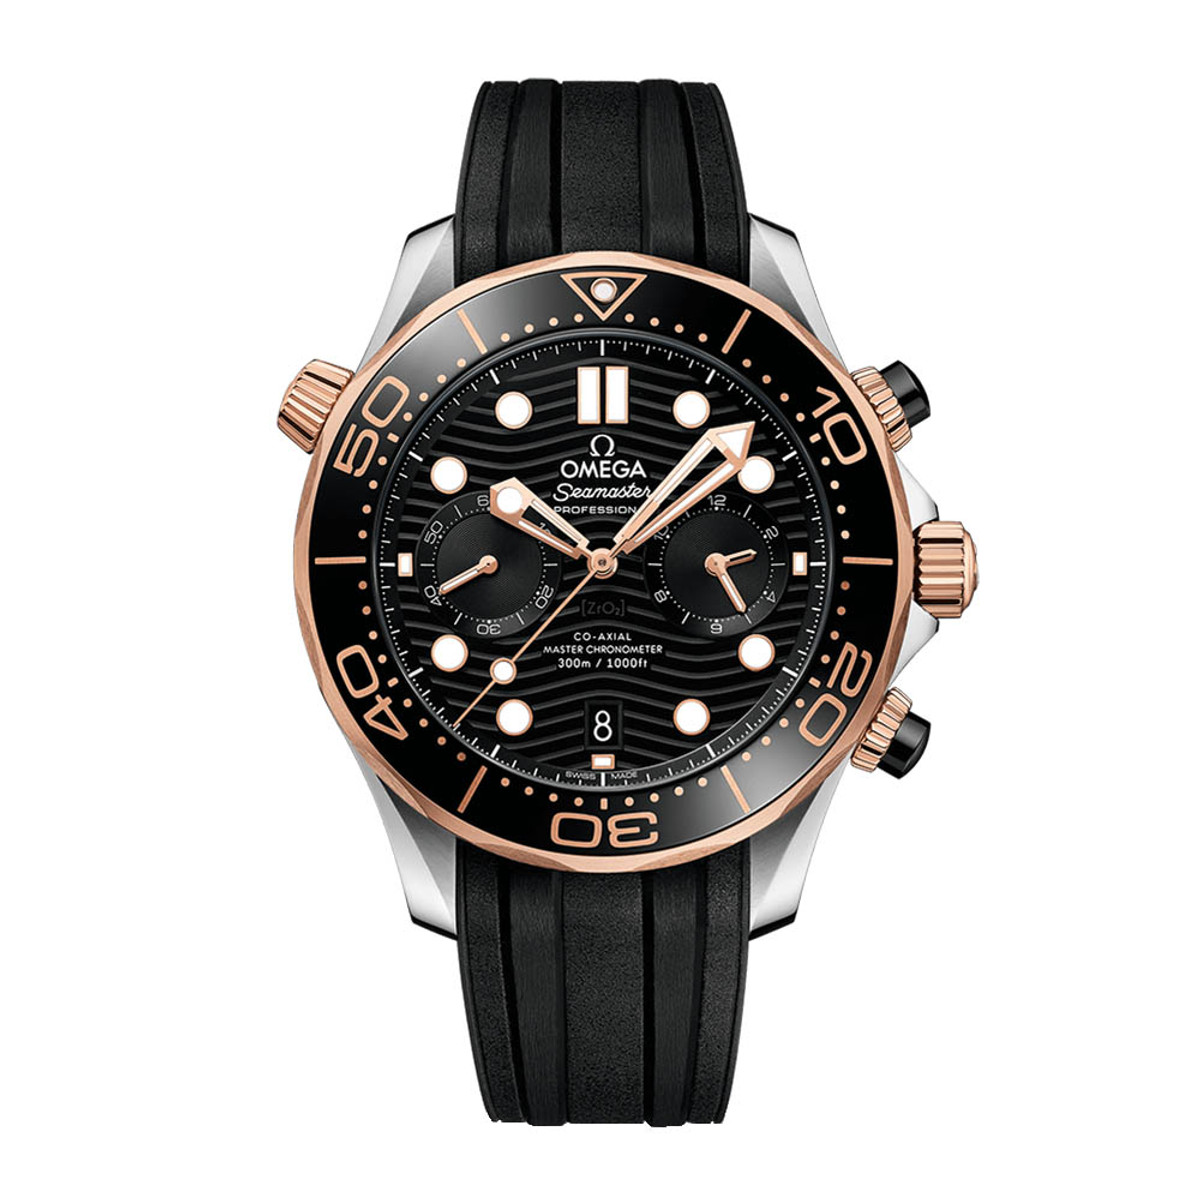 Omega Seamaster Diver 300M Chronograph 18K Sedna Gold & Steel 44mm 210.22.44.51.01.001-WOMG0891 Product Image